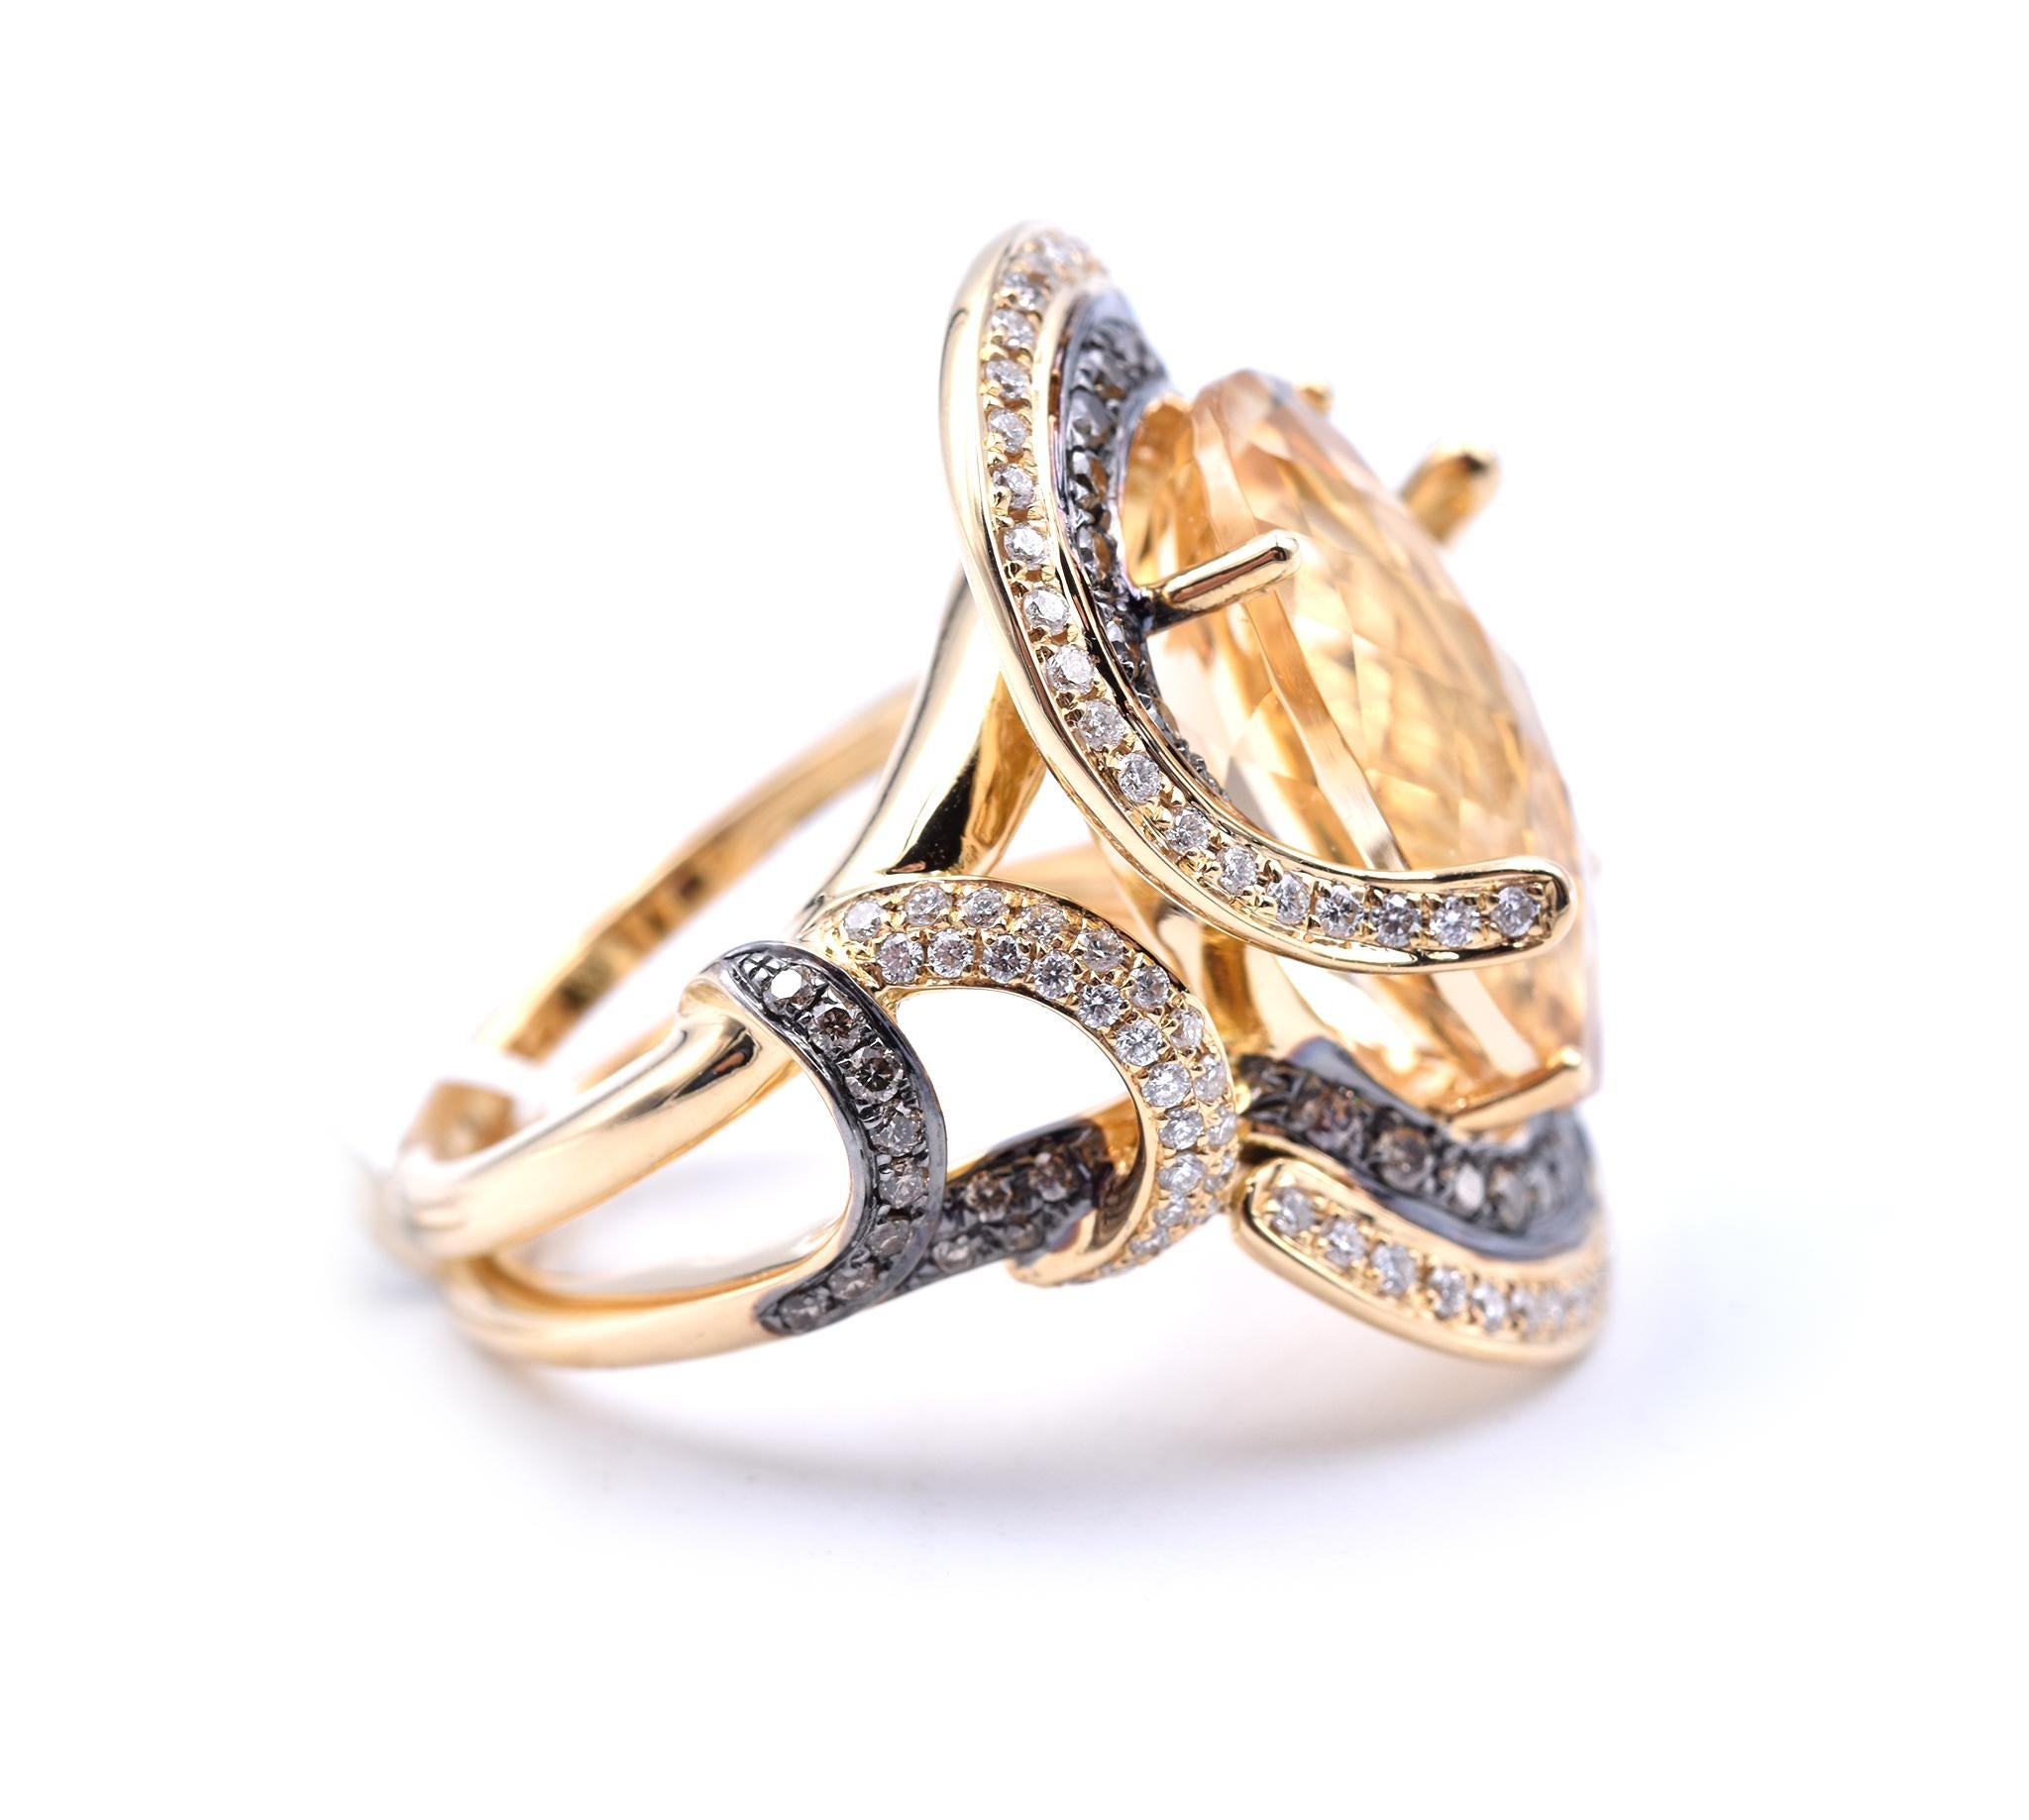 Material: 18k yellow gold
Citrine: 1 oval cut = 11.56cttw
Diamonds: 48 round cognac diamonds and 110 round white diamonds = 1.06cttw
Ring Size: 7 (allow up to two additional business days for sizing requests)
Weight: 18.27 grams
